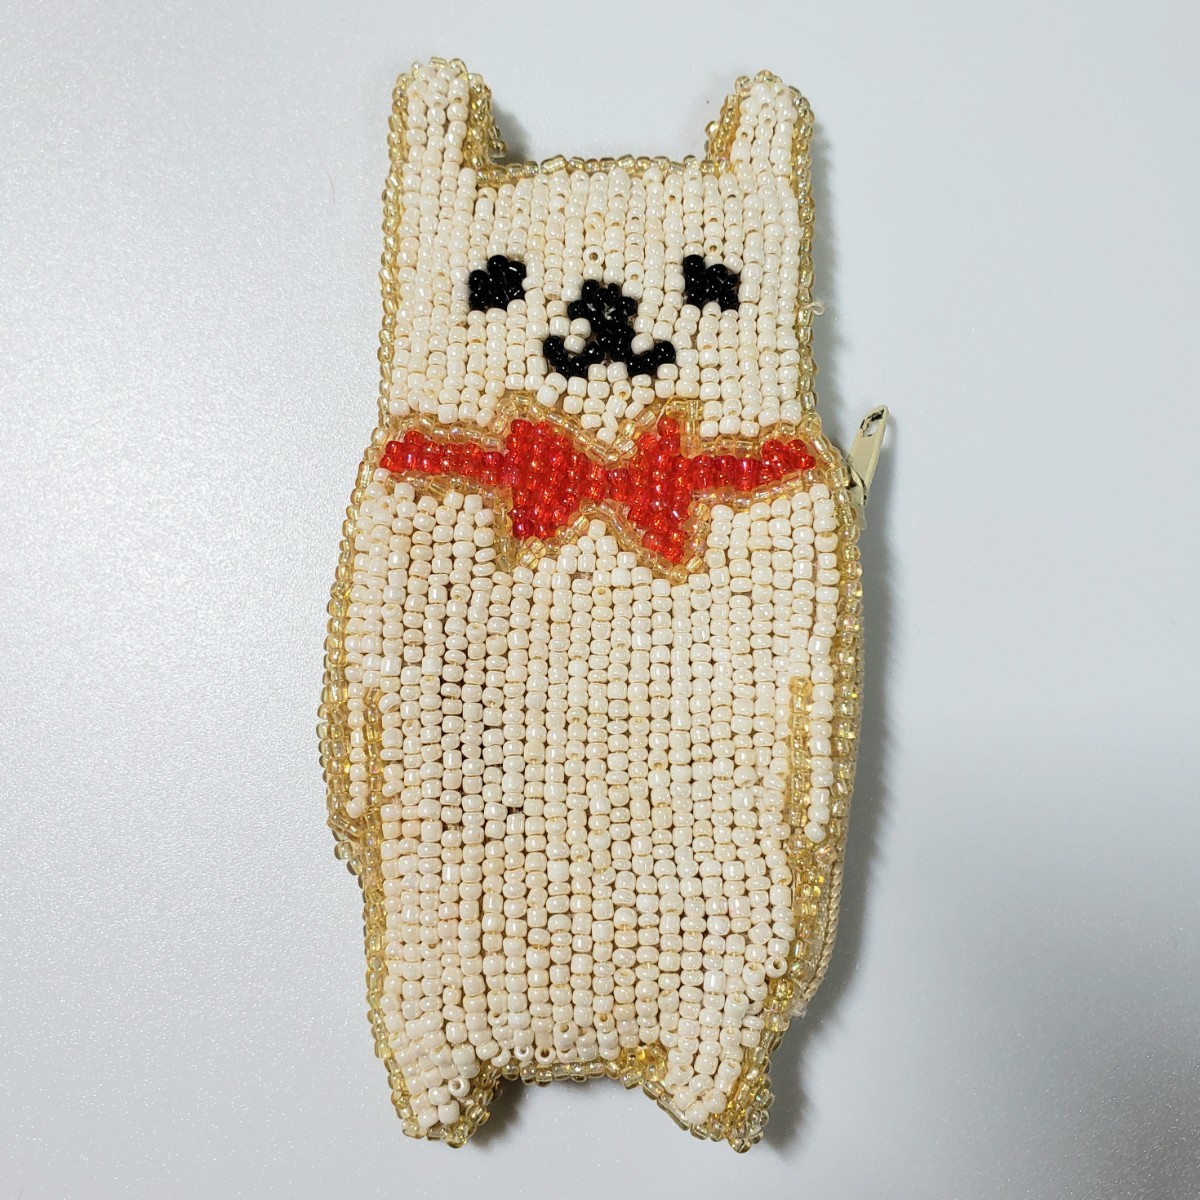  free shipping * anonymity delivery * beads pouch cat .. stamp . case is .. inserting dressing up lovely ..... Mini pouch ...okojo ton 